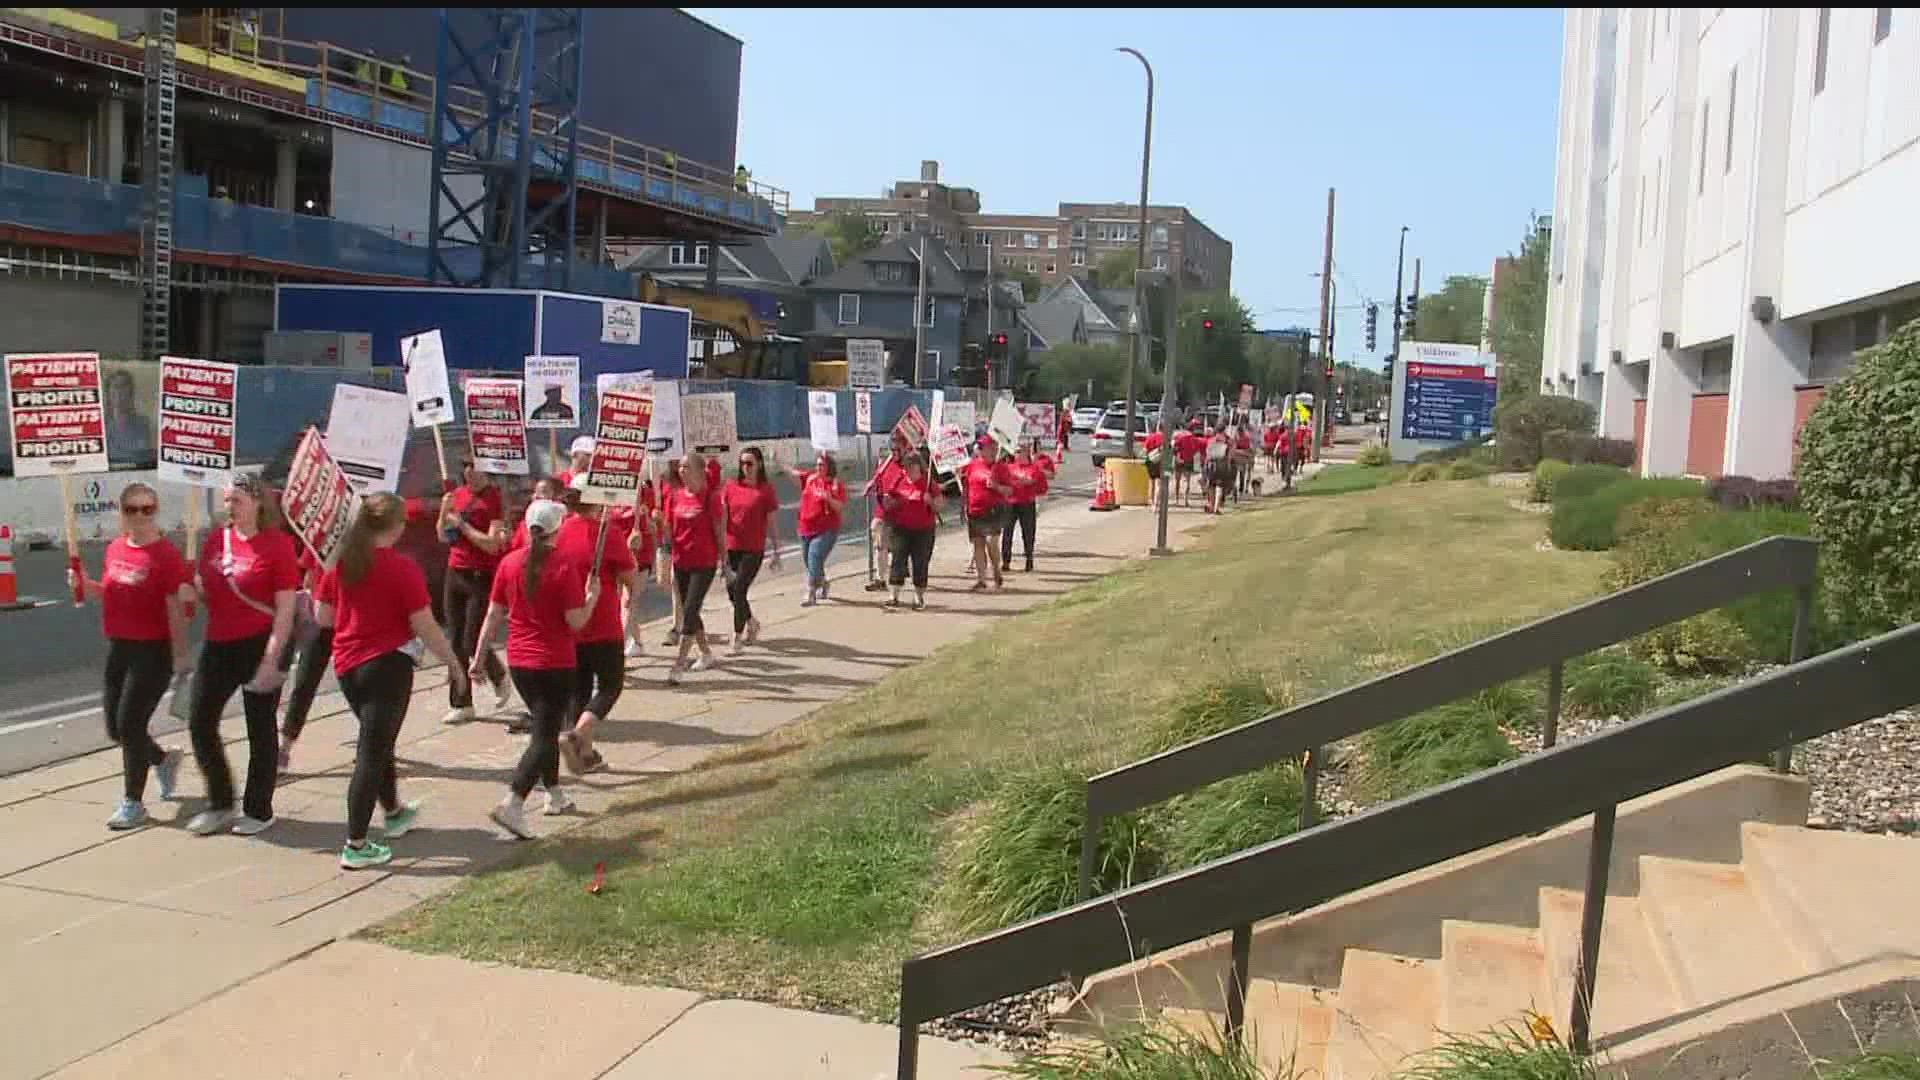 A closer look at what the union is asking for as 15,000 Minnesota nurses returned to the picket line Tuesday for the second day.